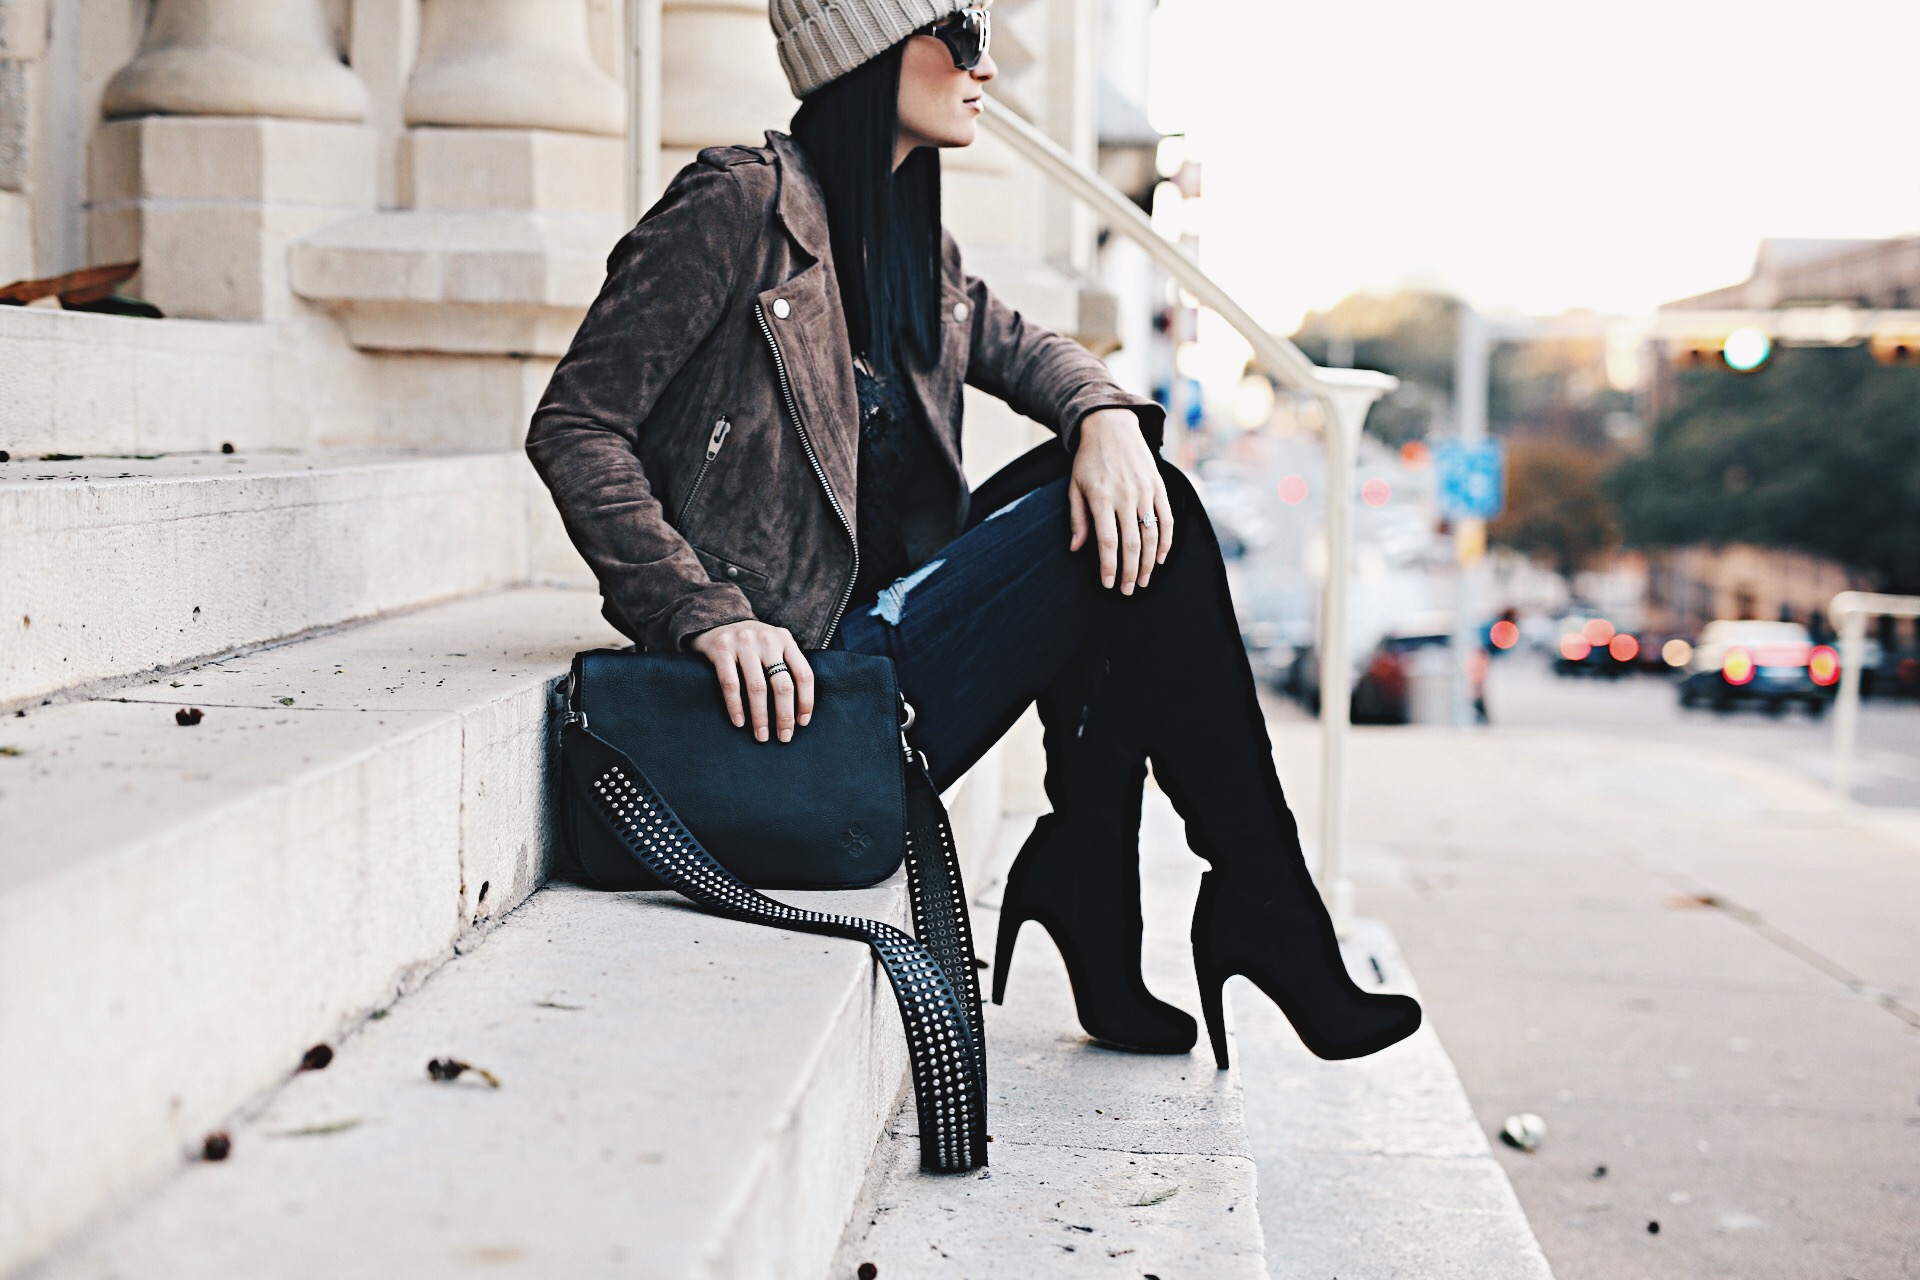 Ashley Hargrove of DTKAustin is wearing a Patricia Nash leather crossbody from Macy's, Steve Madden over the knee boots and a BlankNYC leather jacket from Nordstrom.